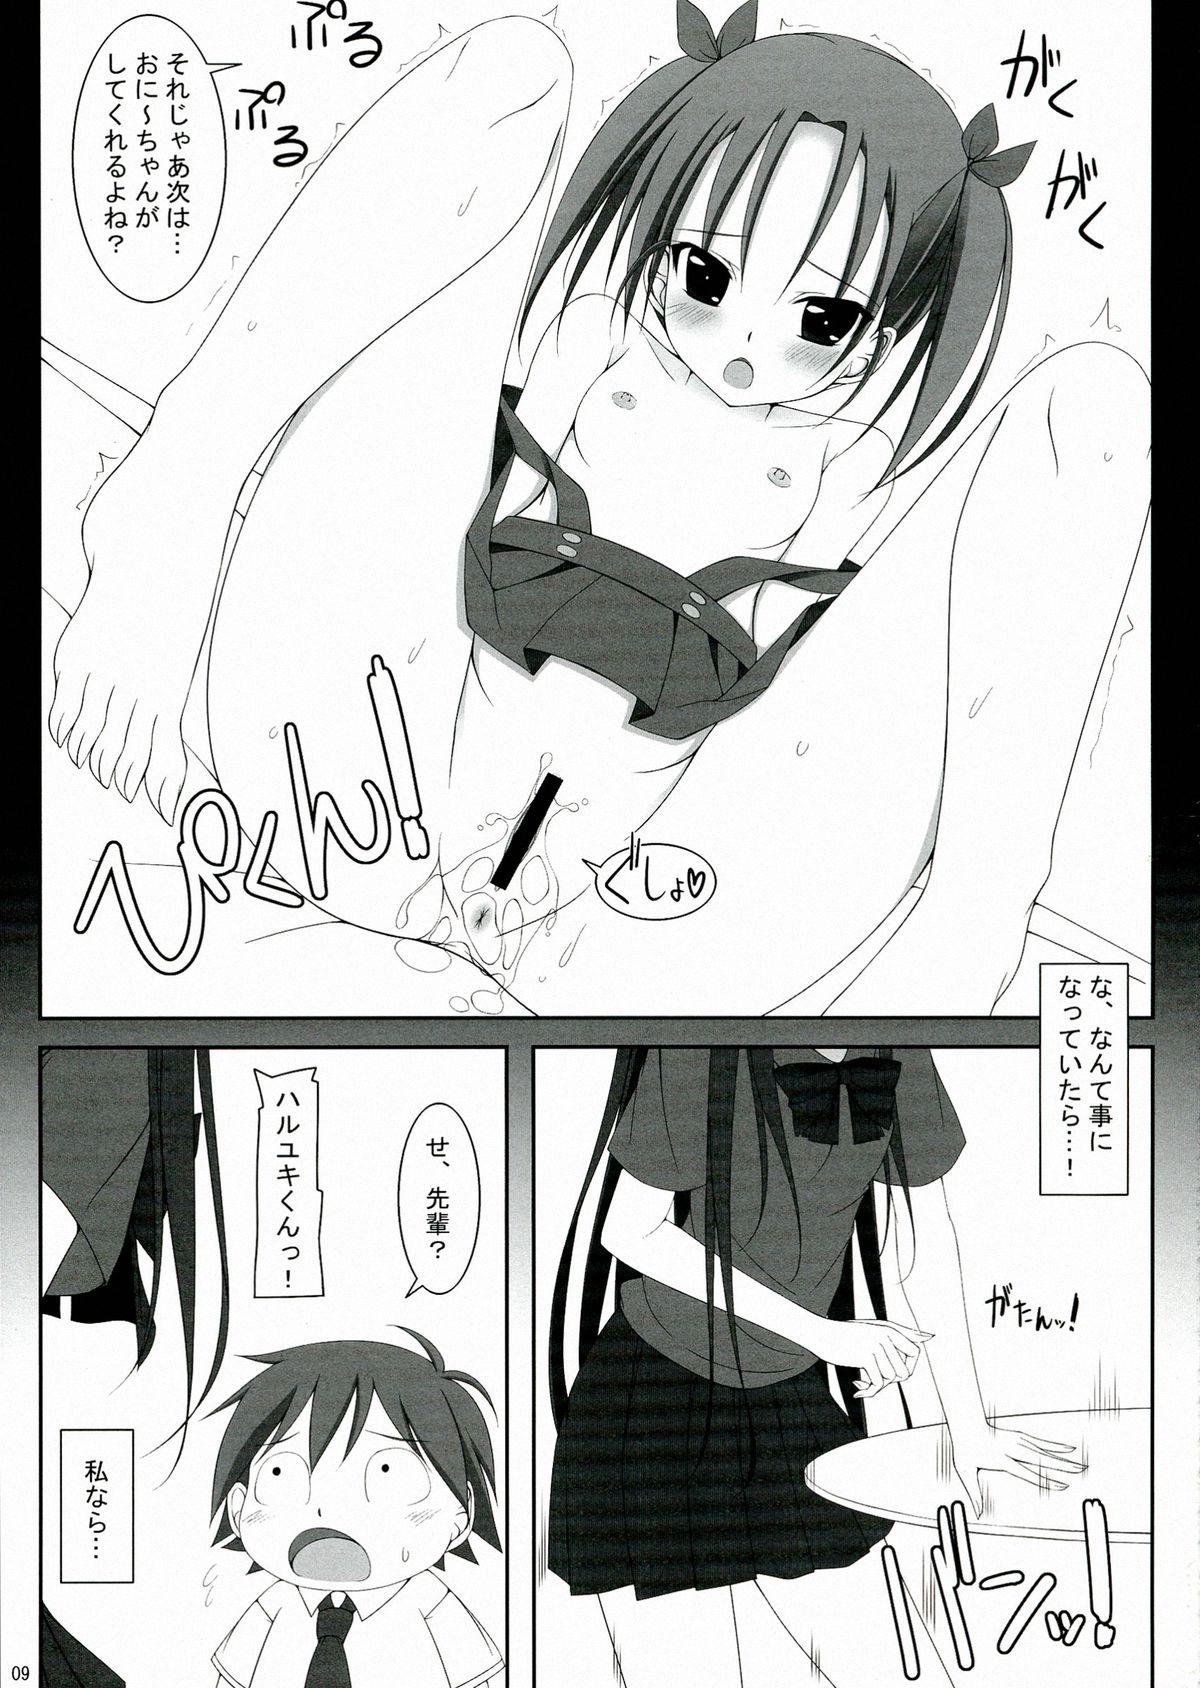 Animation M-REPO! 01 Accelerated delusion >>> Kasoku Mousou - Accel world Pussylicking - Page 9